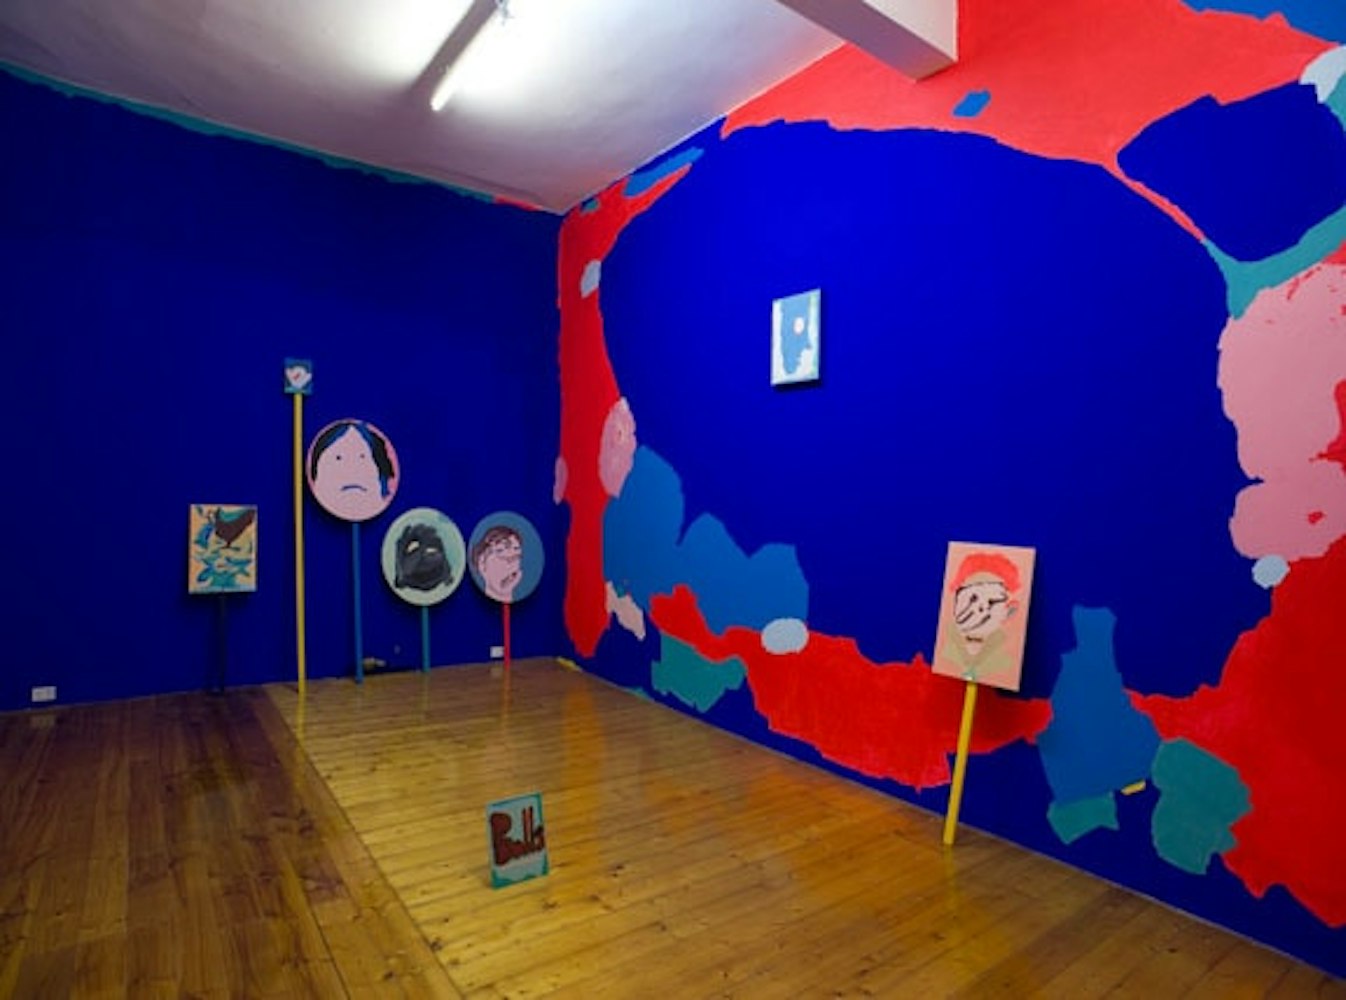 Tom Polo, Gestures and Mistakes, 2012, installation at Gertrude Contemporary..